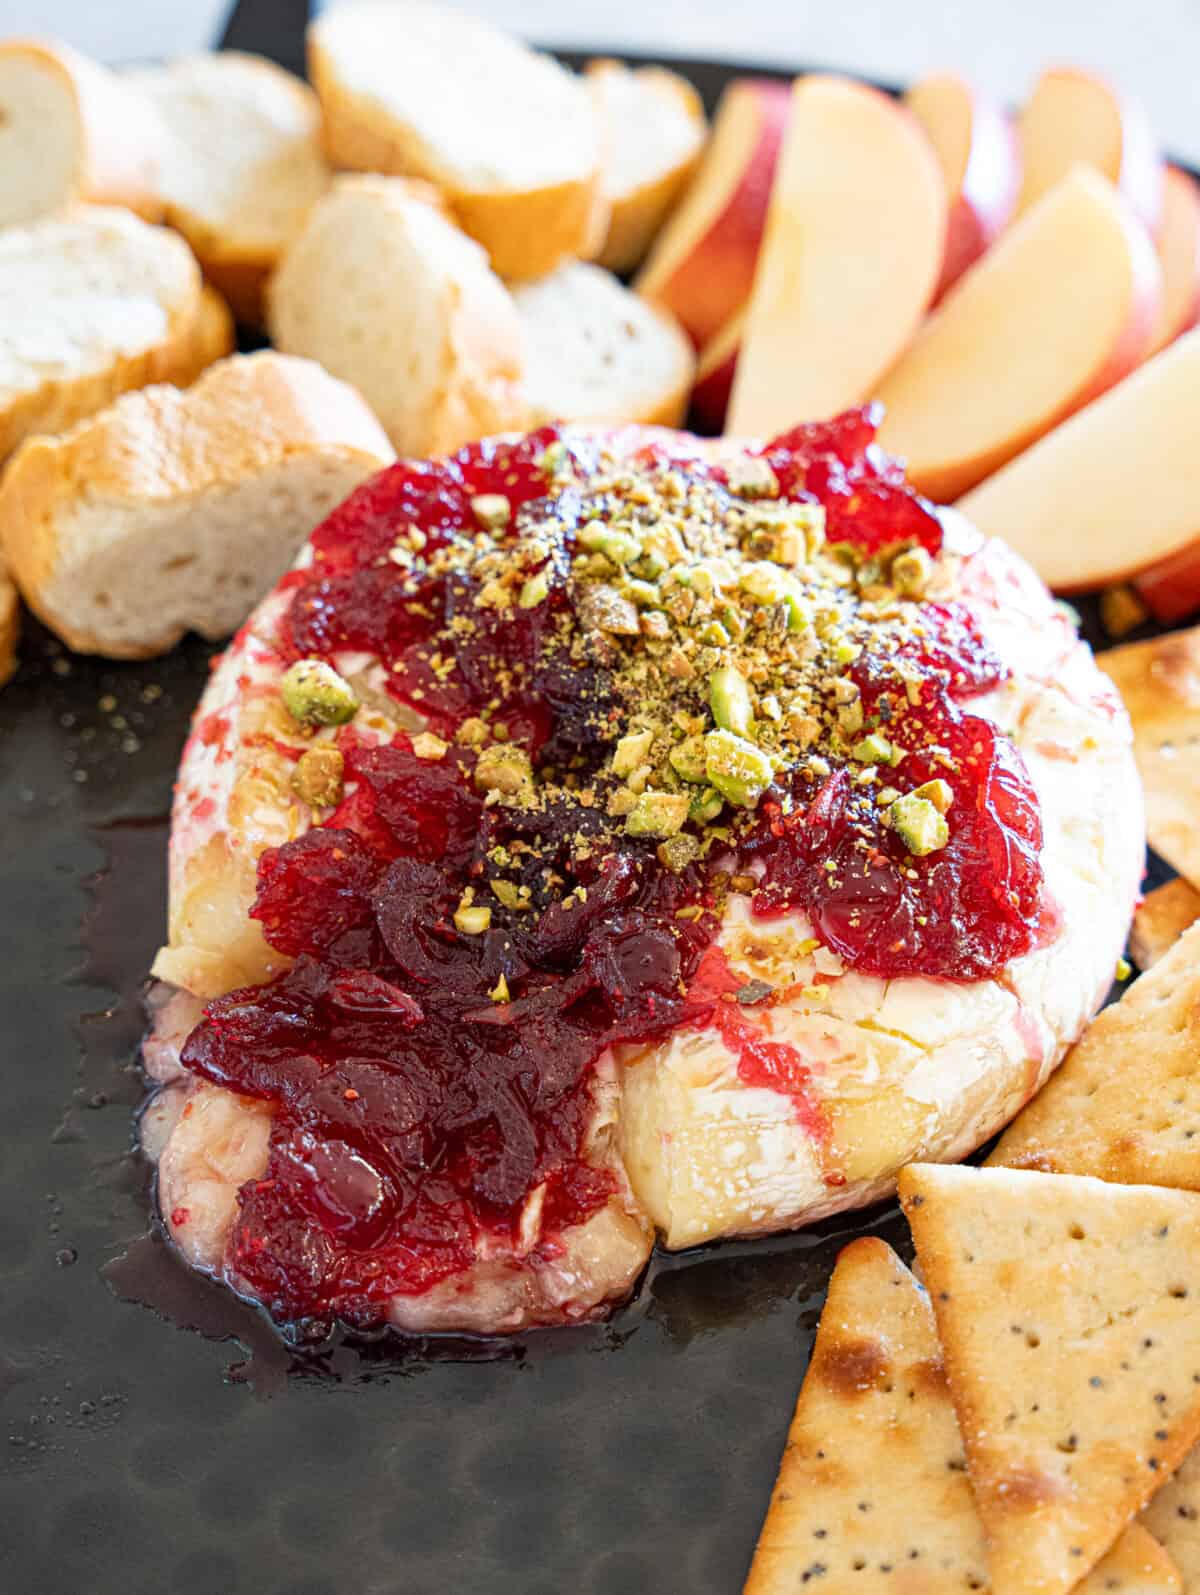 Gooey Brie cheese topped with cranberry sauce, pistachios and surrounded by apple slices, crackers, and bread